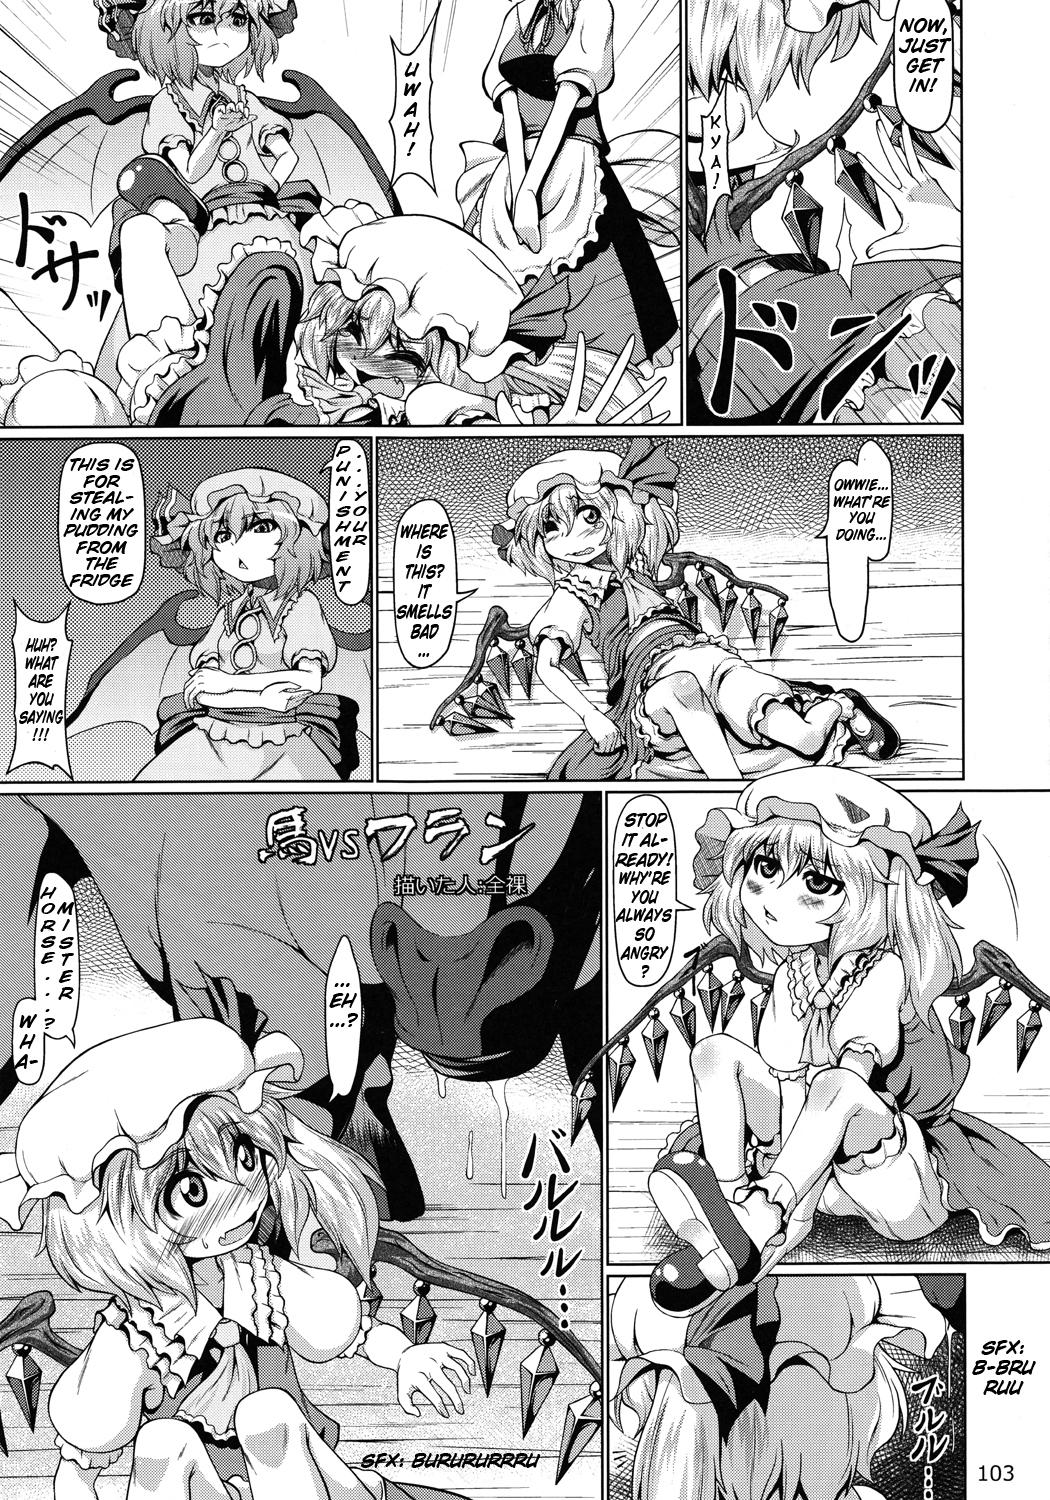 Sex Party Horse vs Flan - Touhou project Ethnic - Page 1